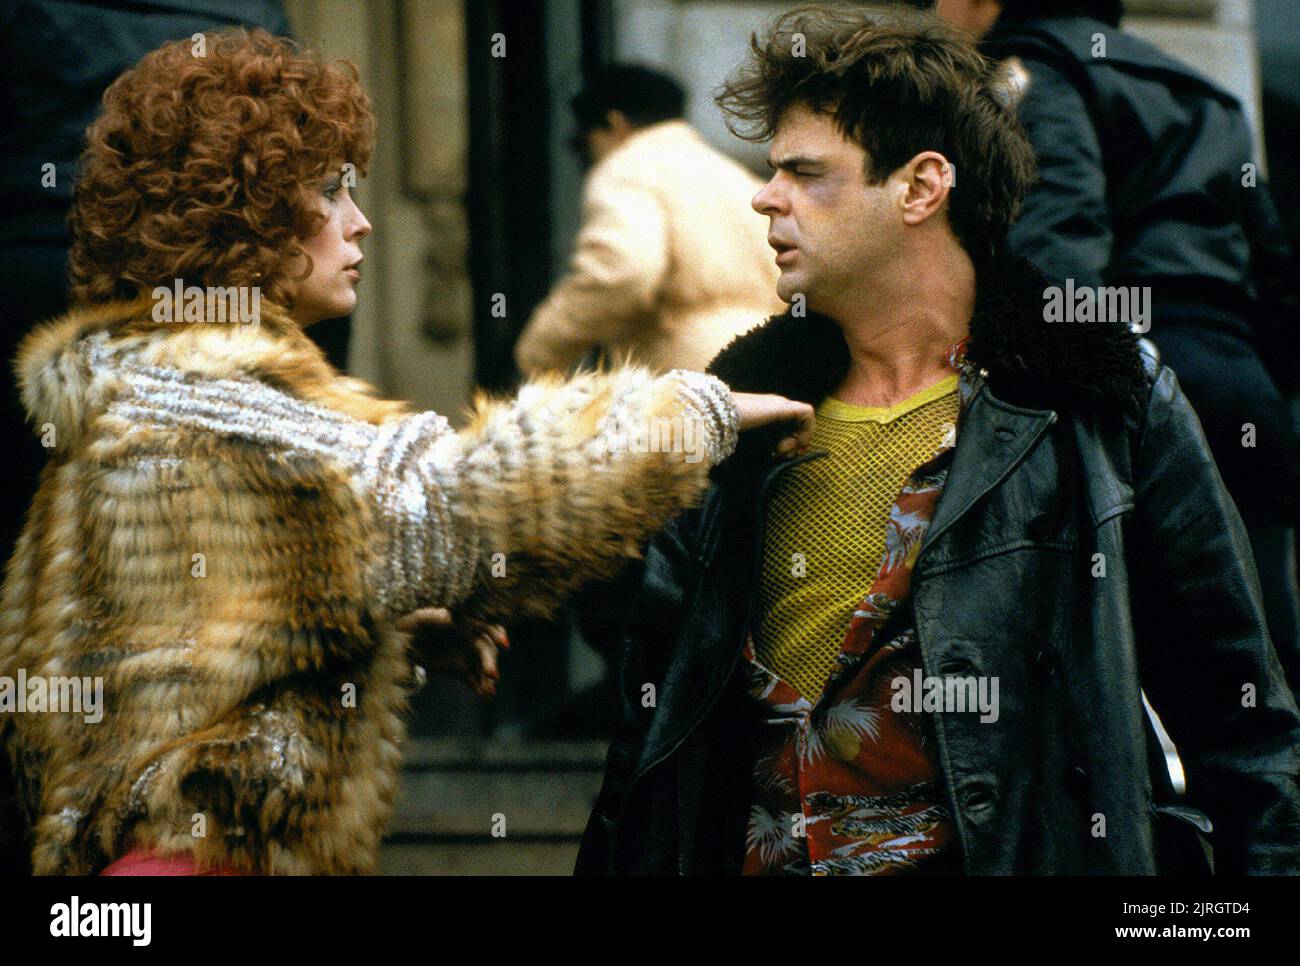 CURTIS,AYKROYD, TRADING PLACES, 1983 Stock Photo